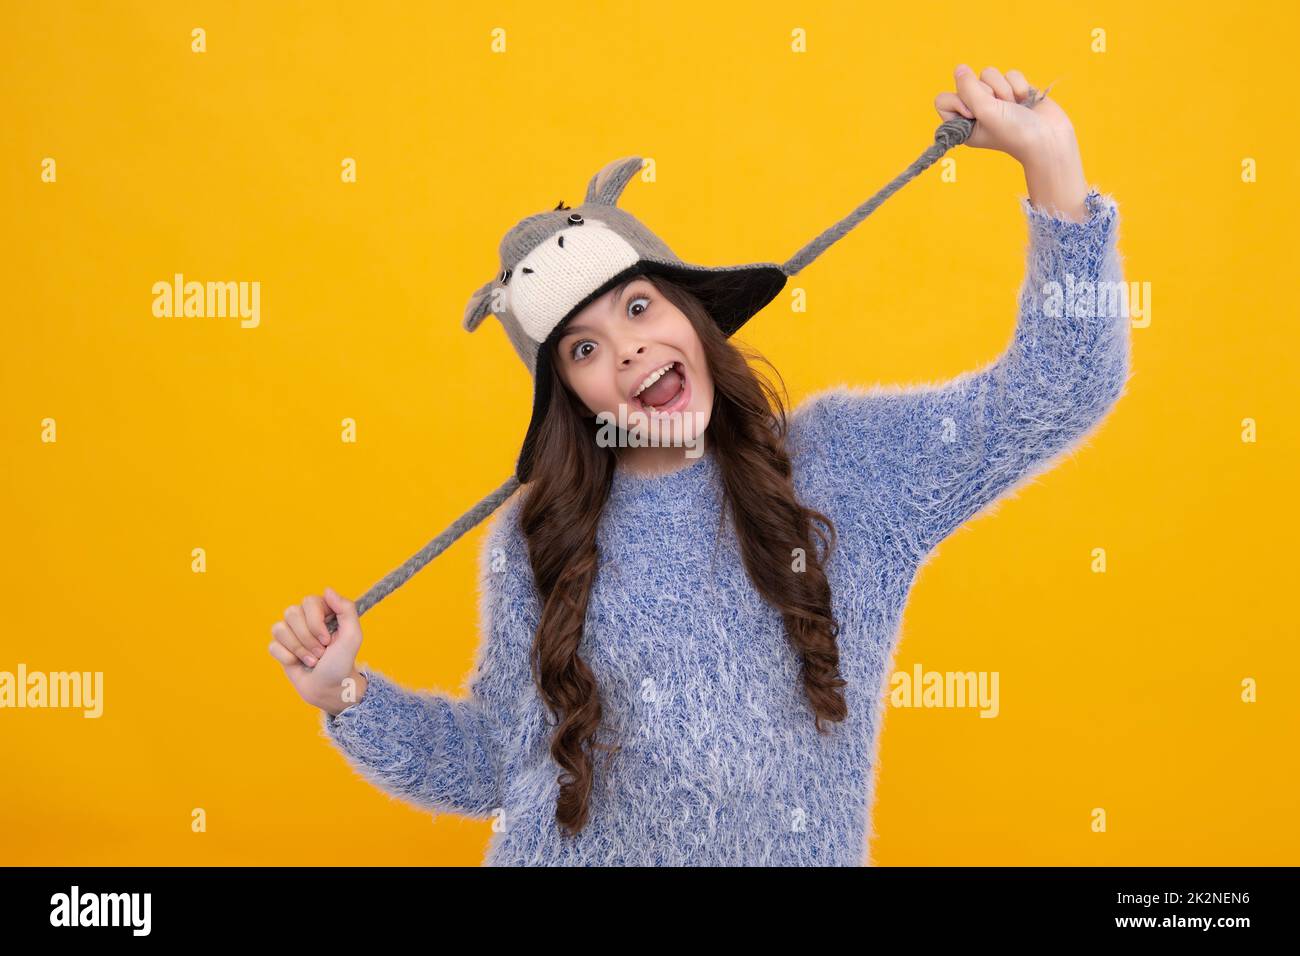 Fashion happy young woman in knitted hat and sweater having fun over colorful blue background. Excited teenager girl. Stock Photo